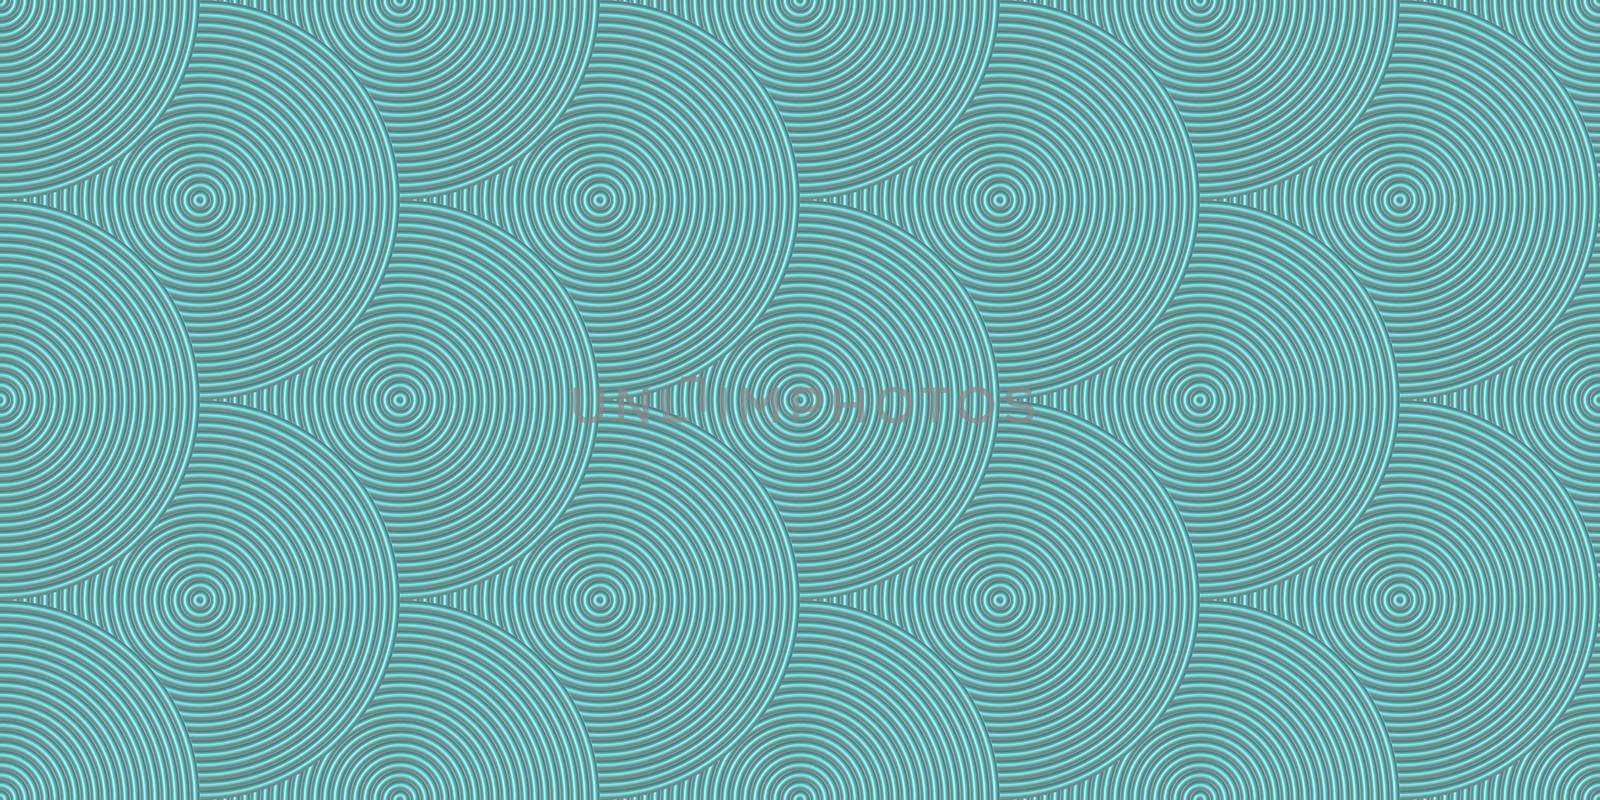 Vintage rings background. Blue art deco seamless texture. Metal circles pattern. by sanches812